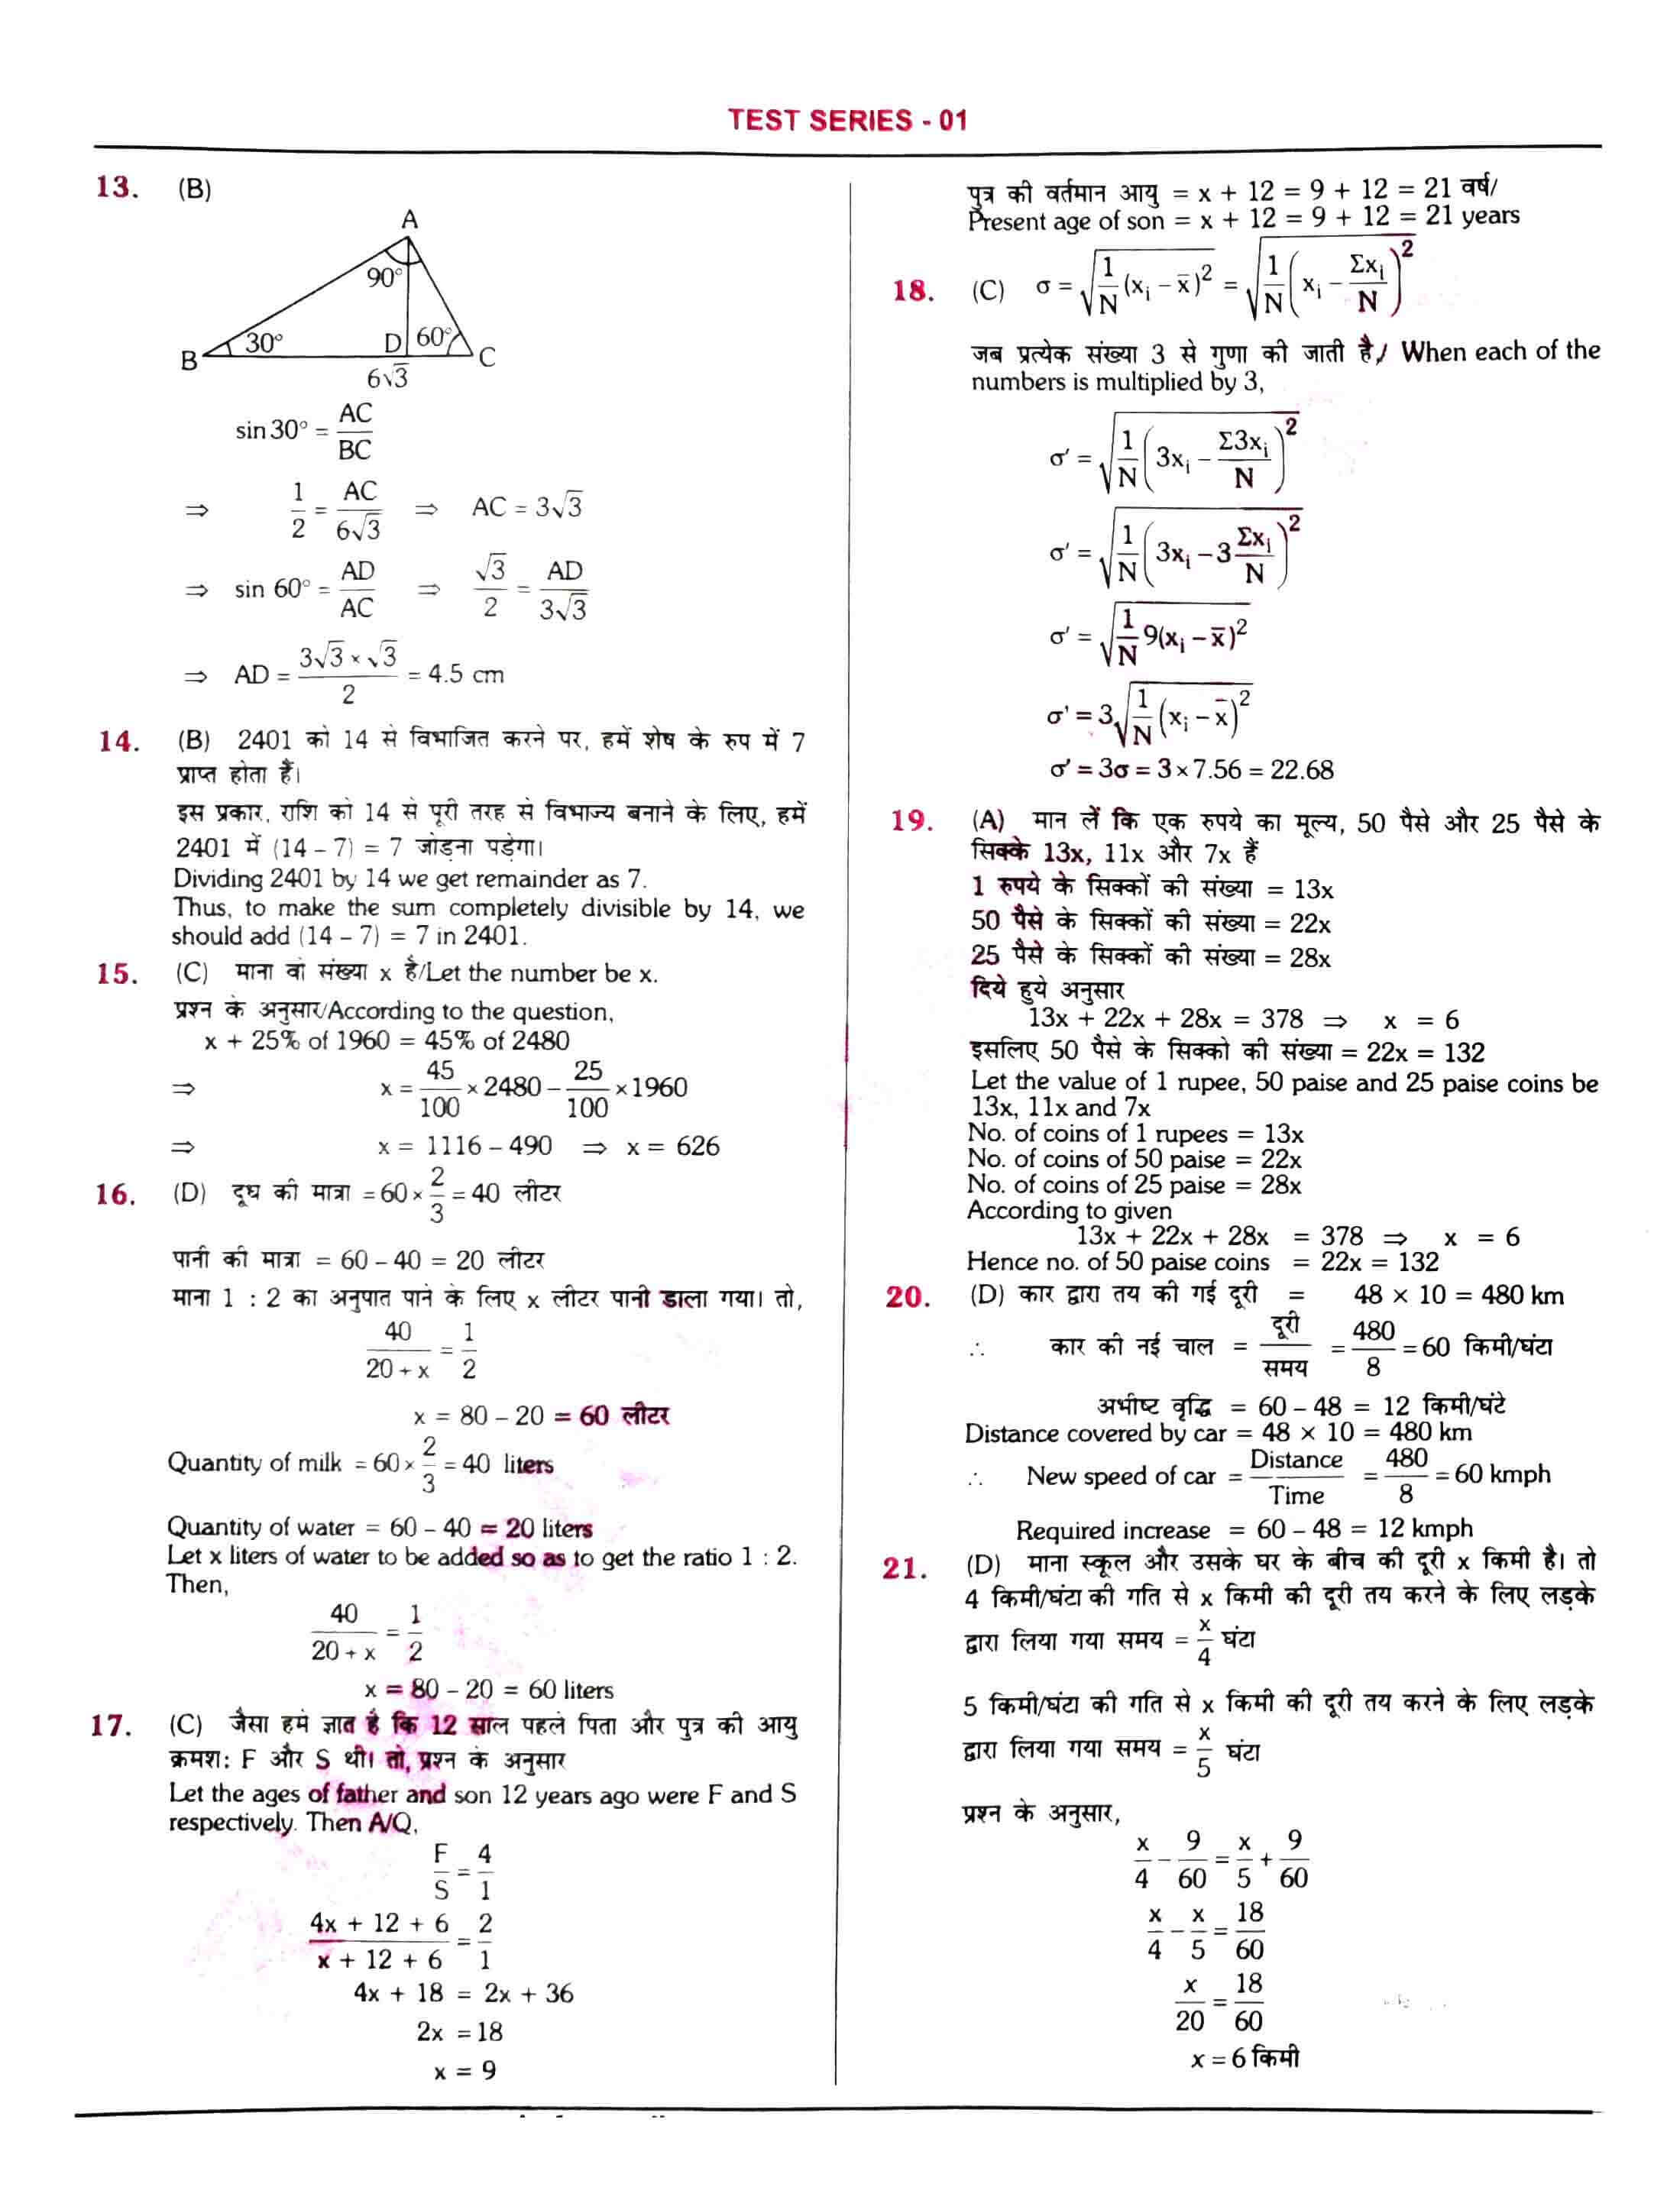 RRB NTPC Question Paper 2021 page 10